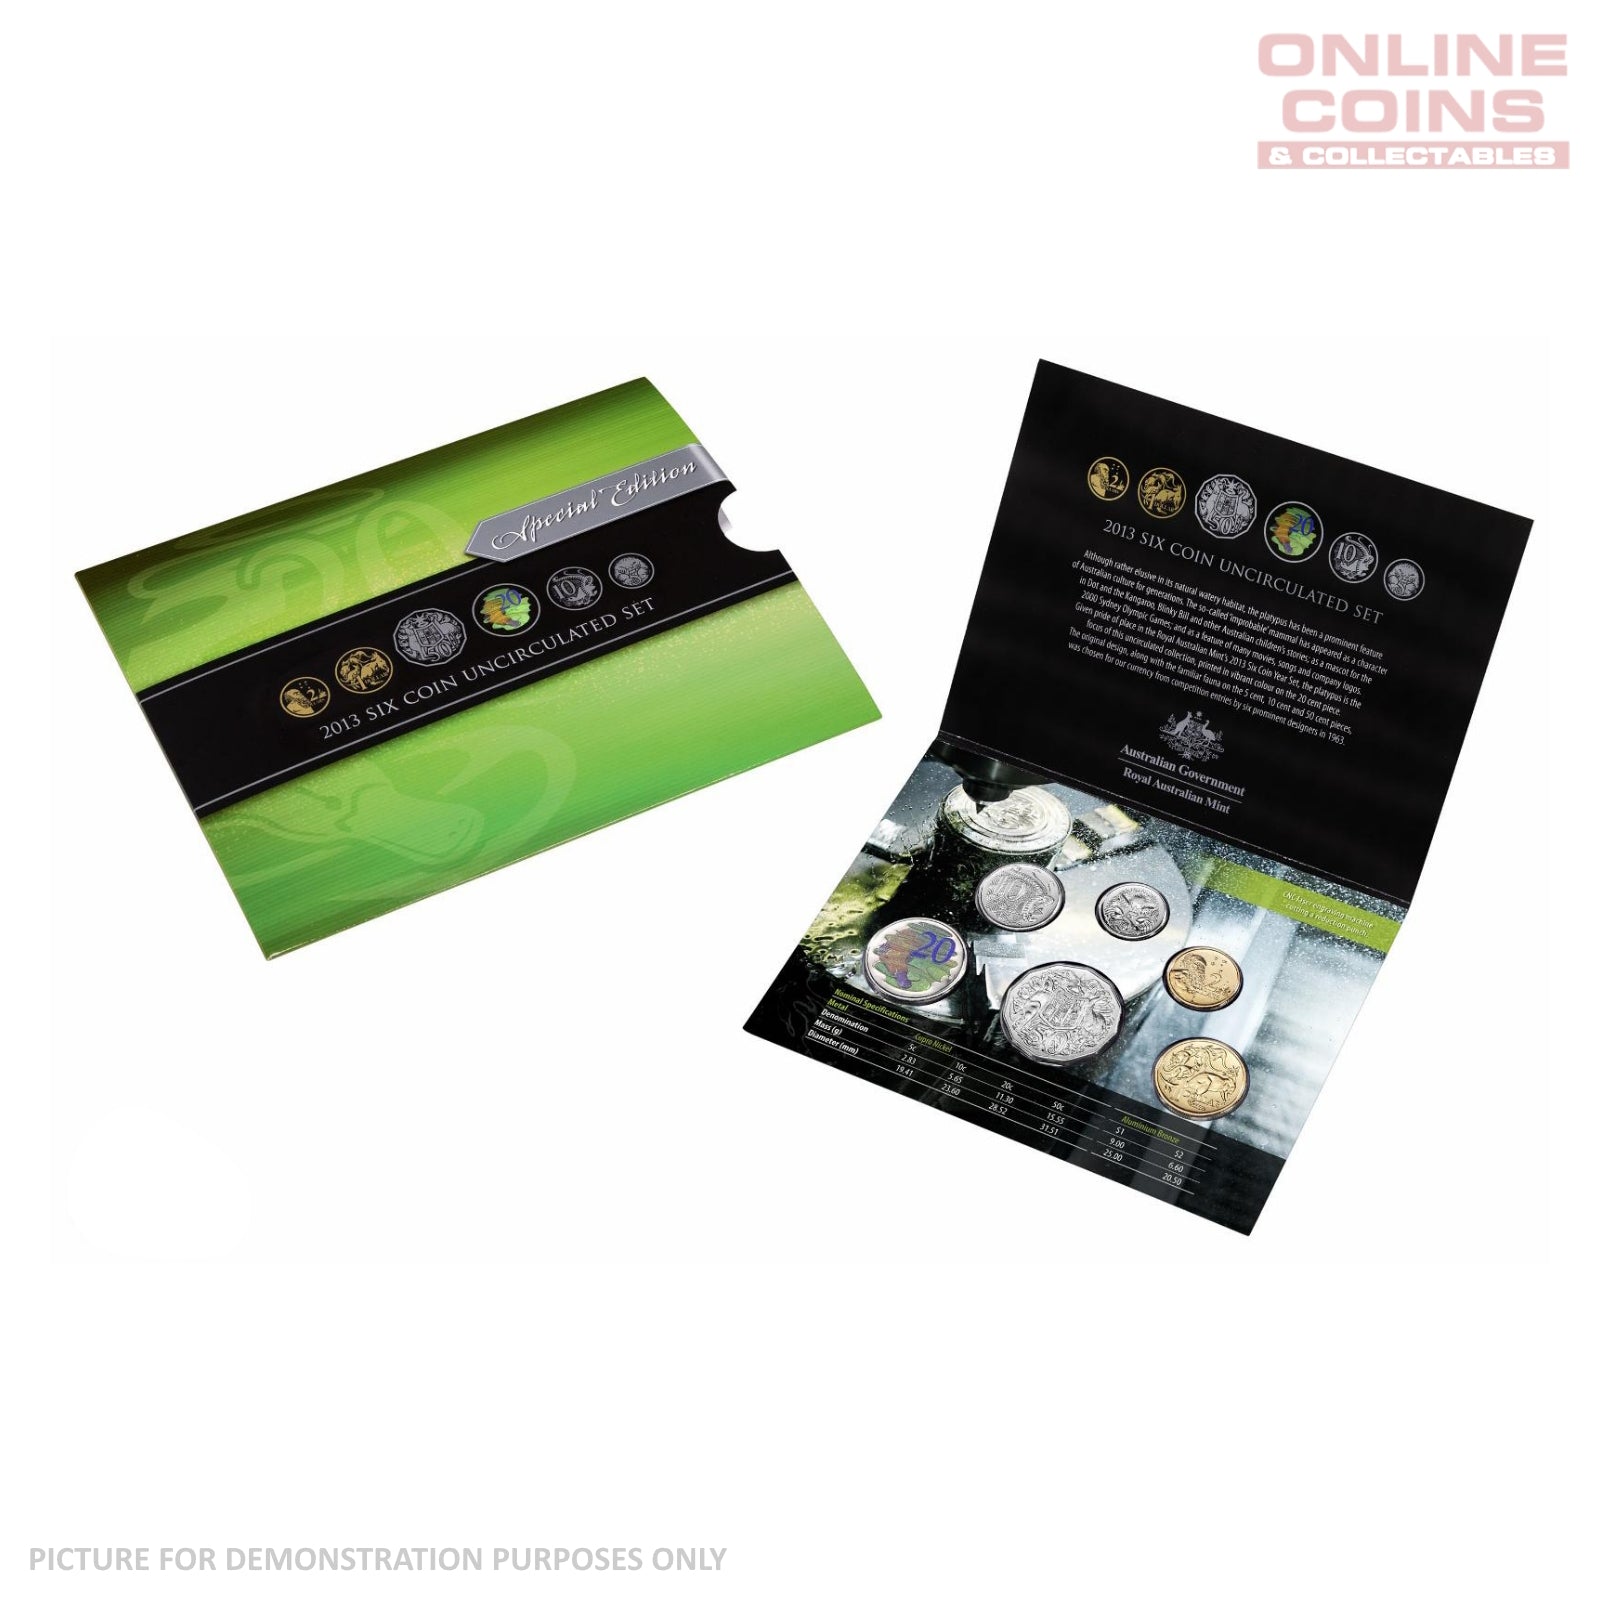 2013 RAM Uncirculated Coin Set - Special Edition Coloured 20c coin included